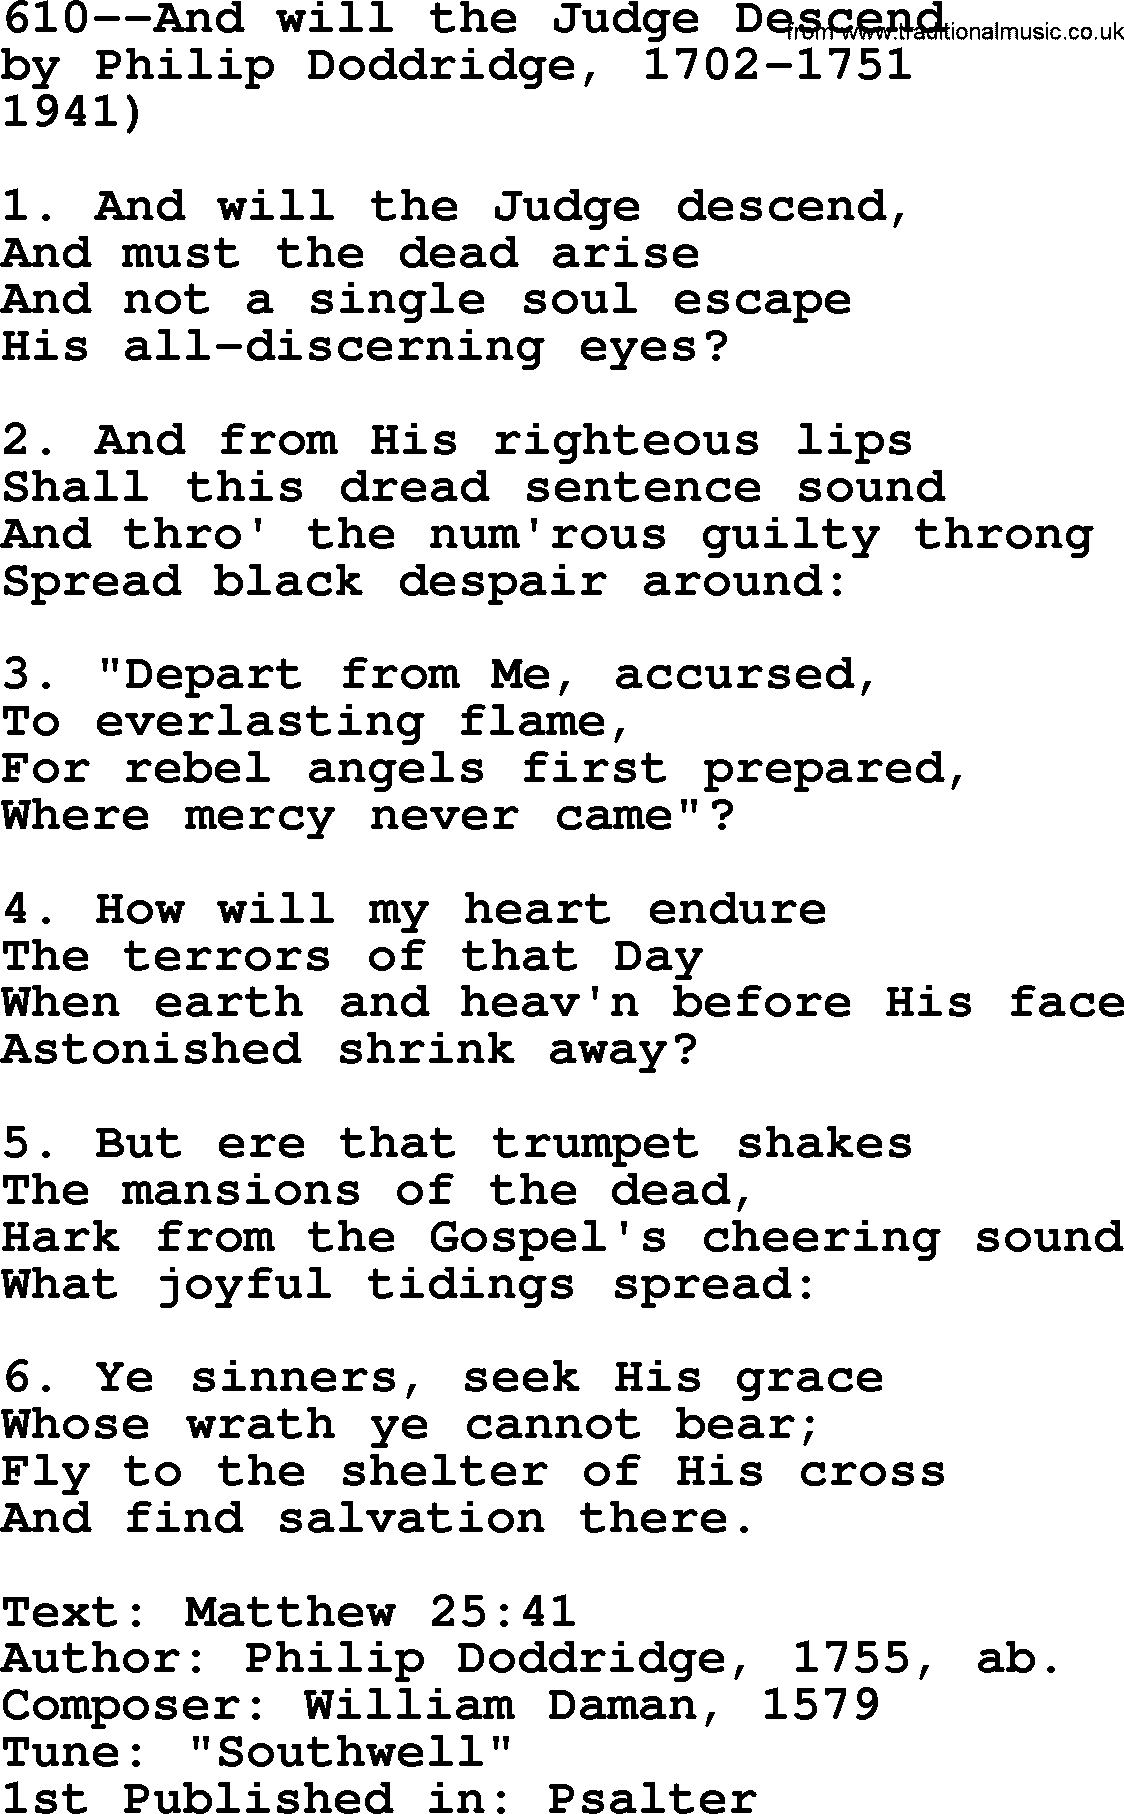 Lutheran Hymn: 610--And will the Judge Descend.txt lyrics with PDF